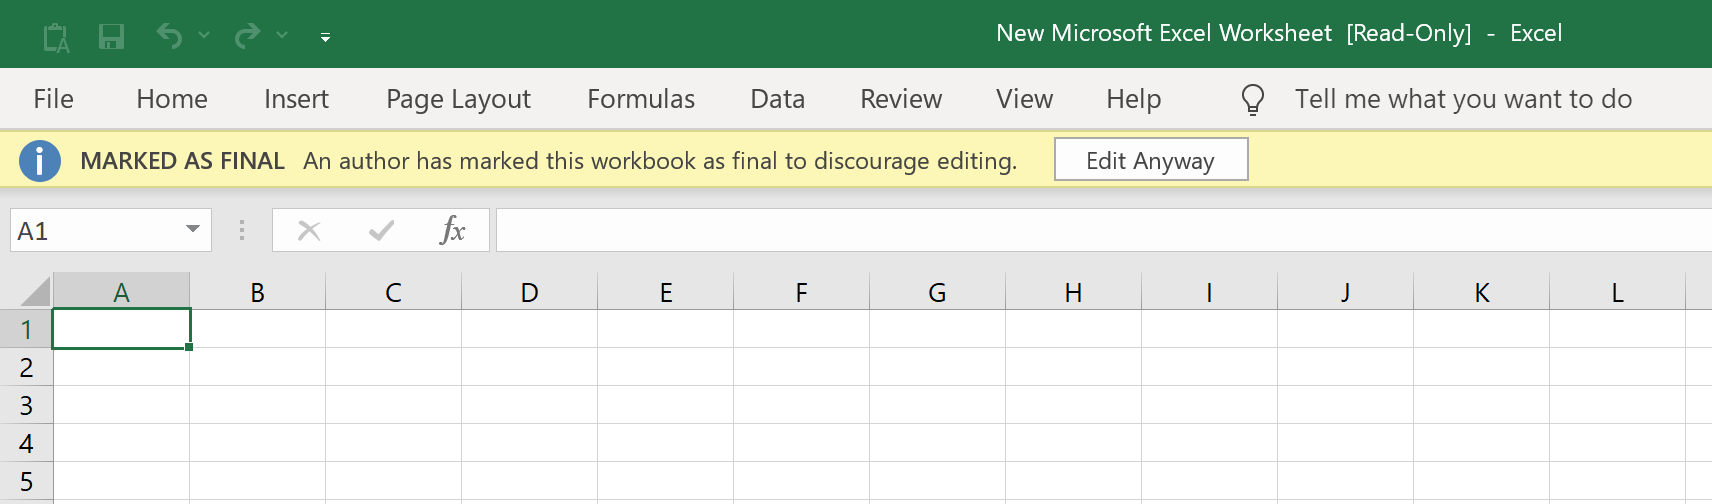 Marked as Final Excel Workbook Click on Edit Anyway to Unprotect